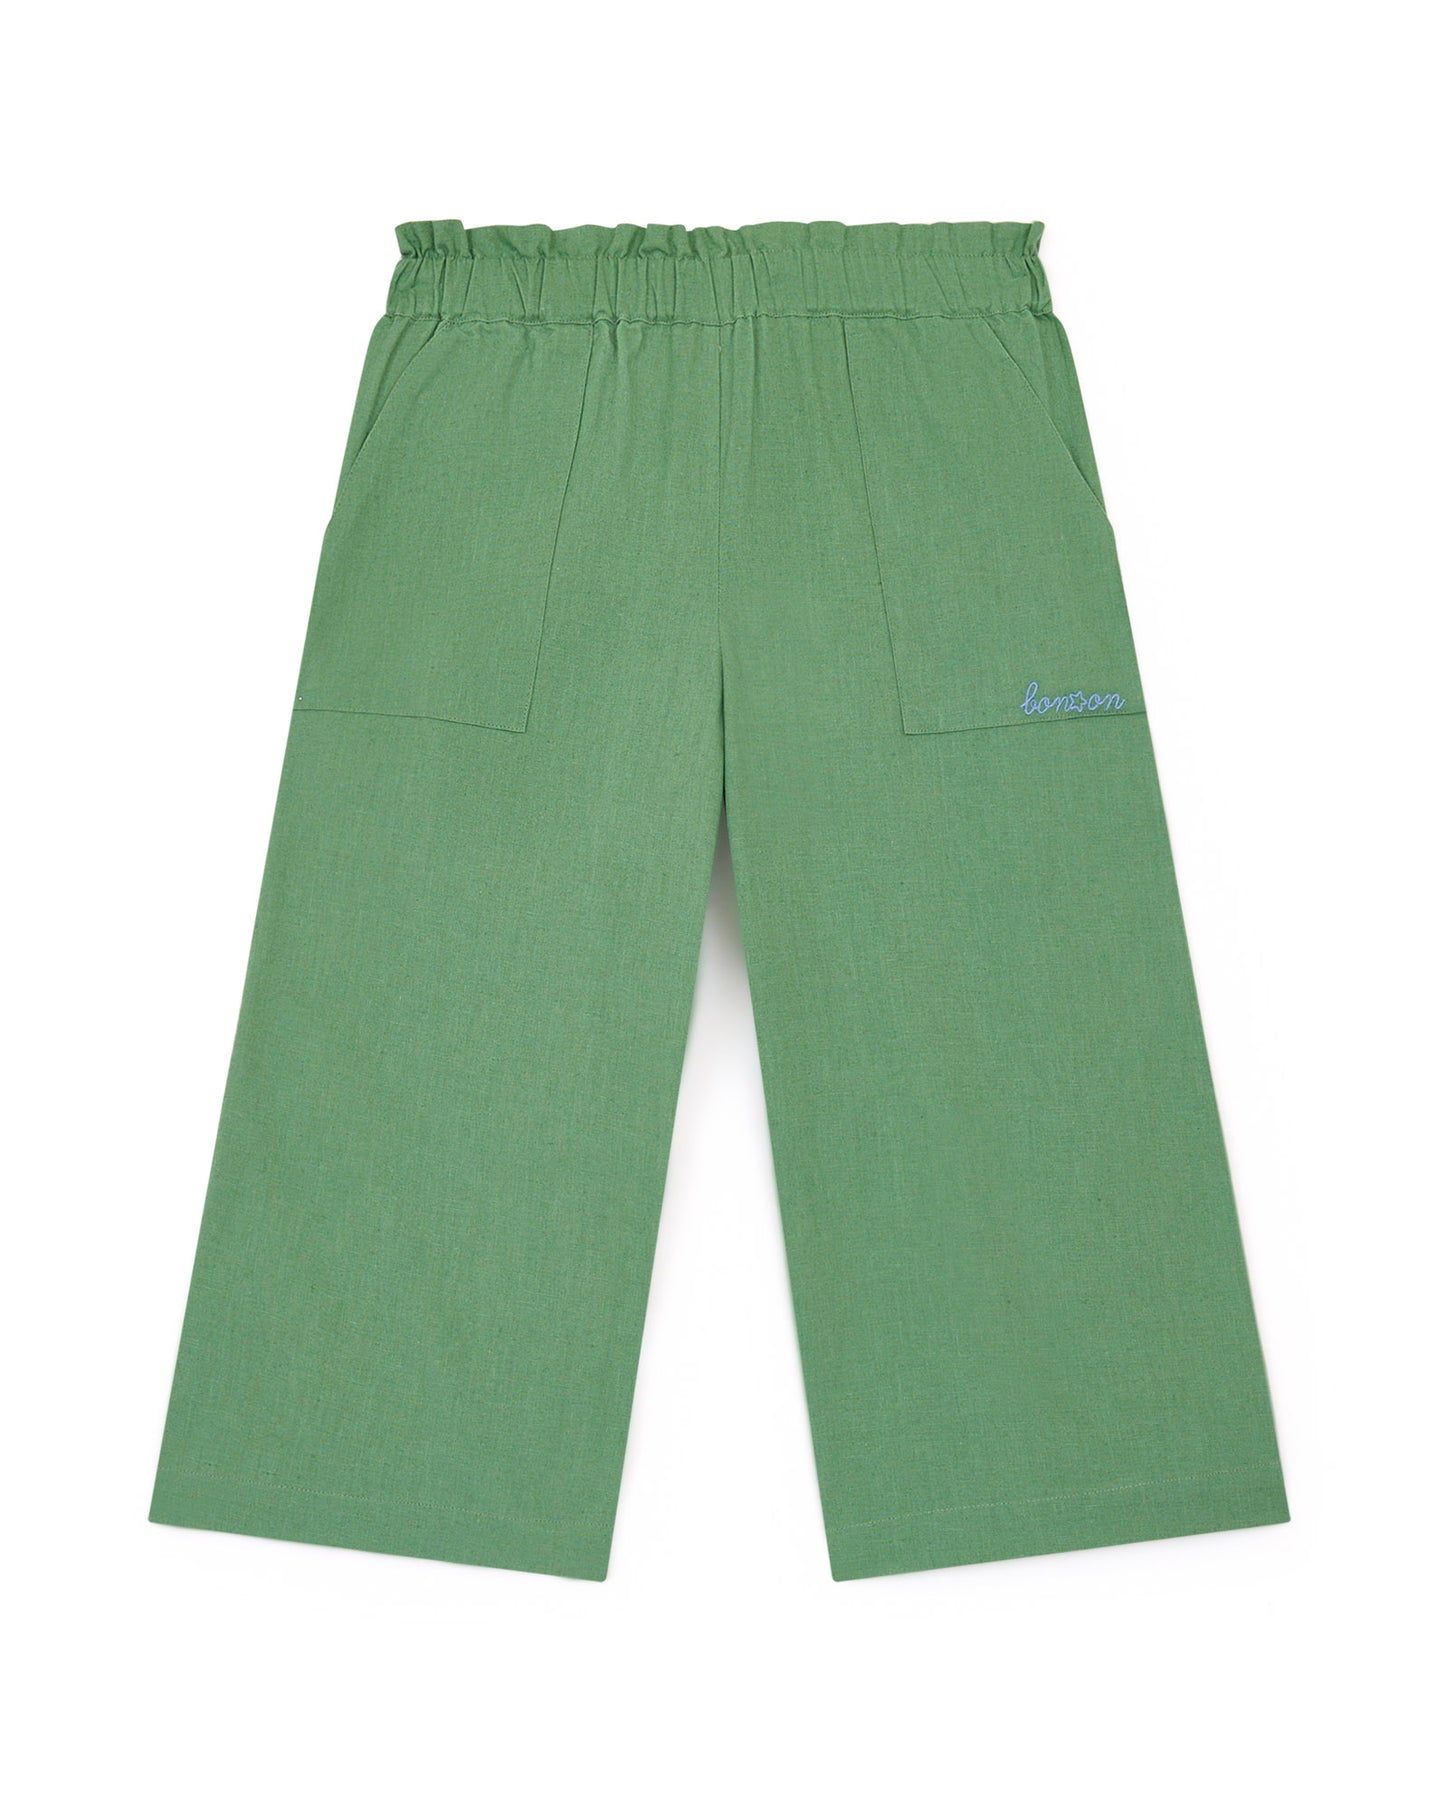 Trousers - Goa Green cotton canvas and linen